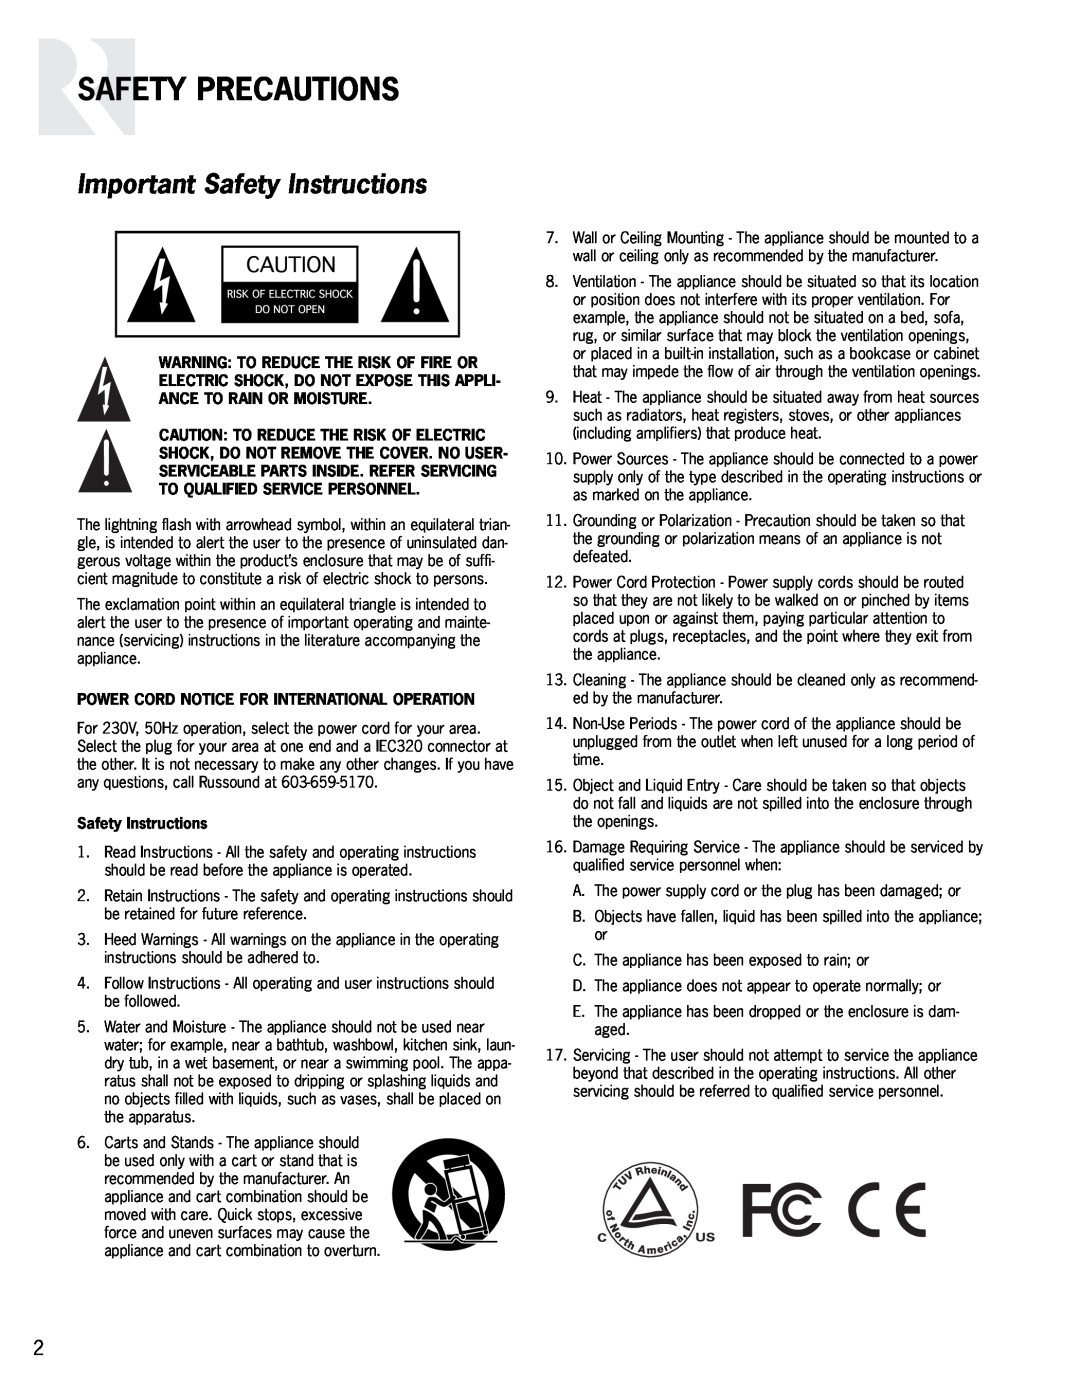 Russound VM1 manual Safety Precautions, Important Safety Instructions, Power Cord Notice For International Operation 